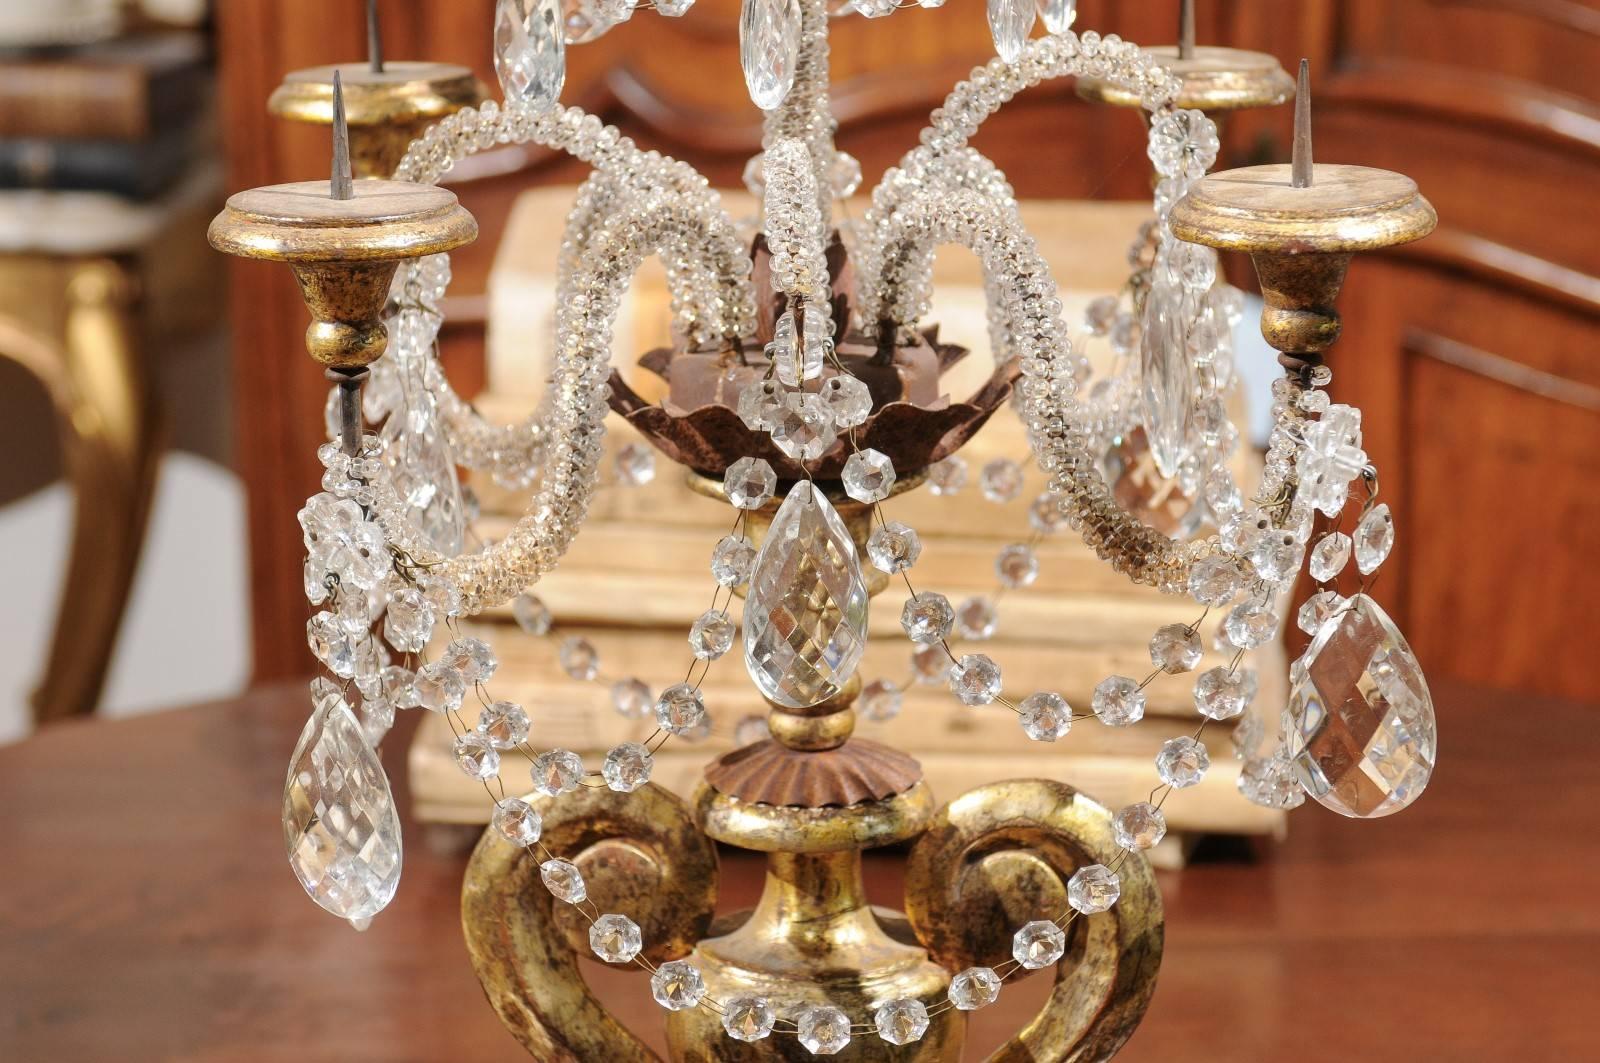 19th Century Italian Neoclassical Style Giltwood and Crystal Girandole from the 1890s